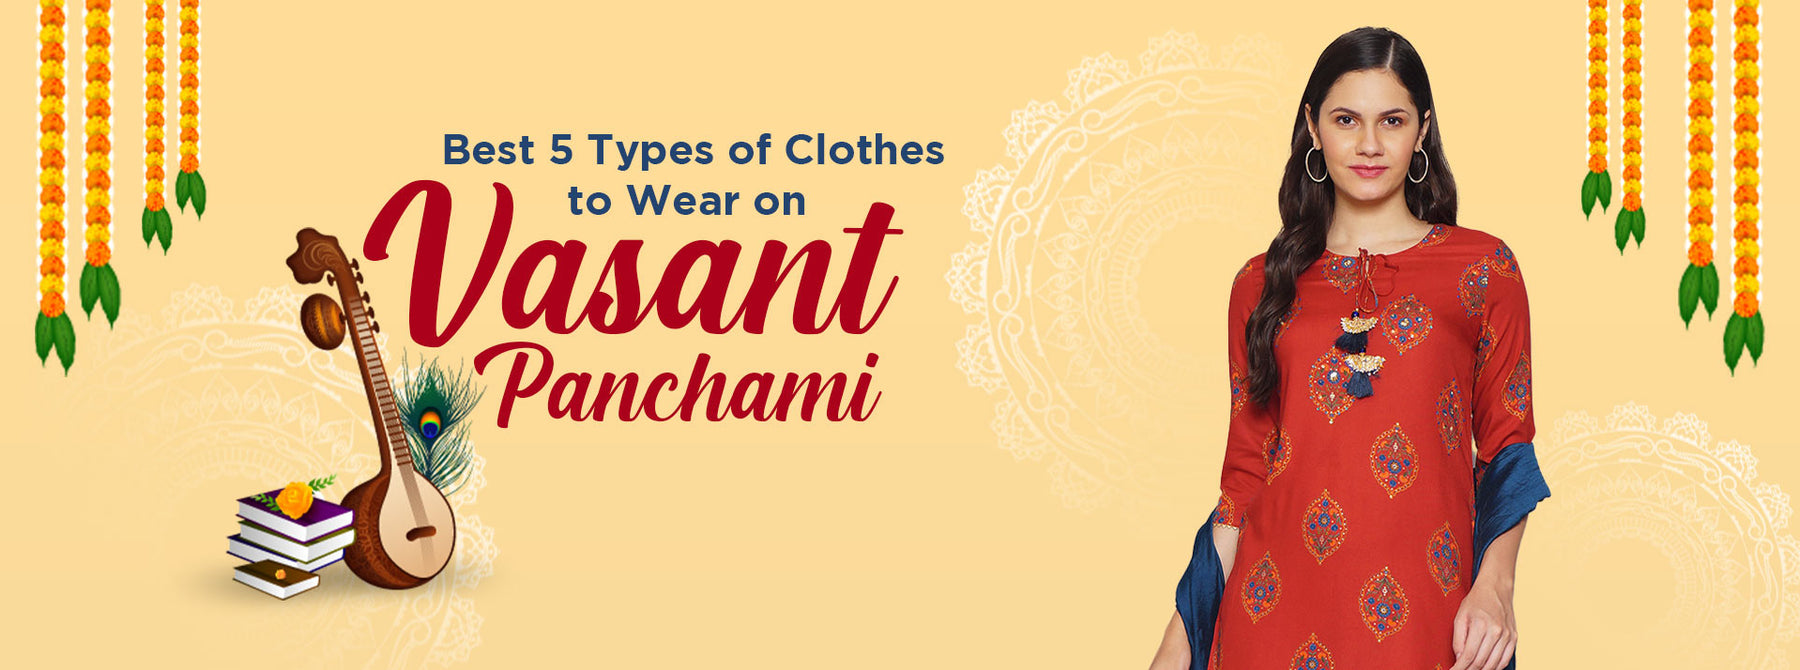 Best 5 Types of Clothes to Wear on Vasant Panchami